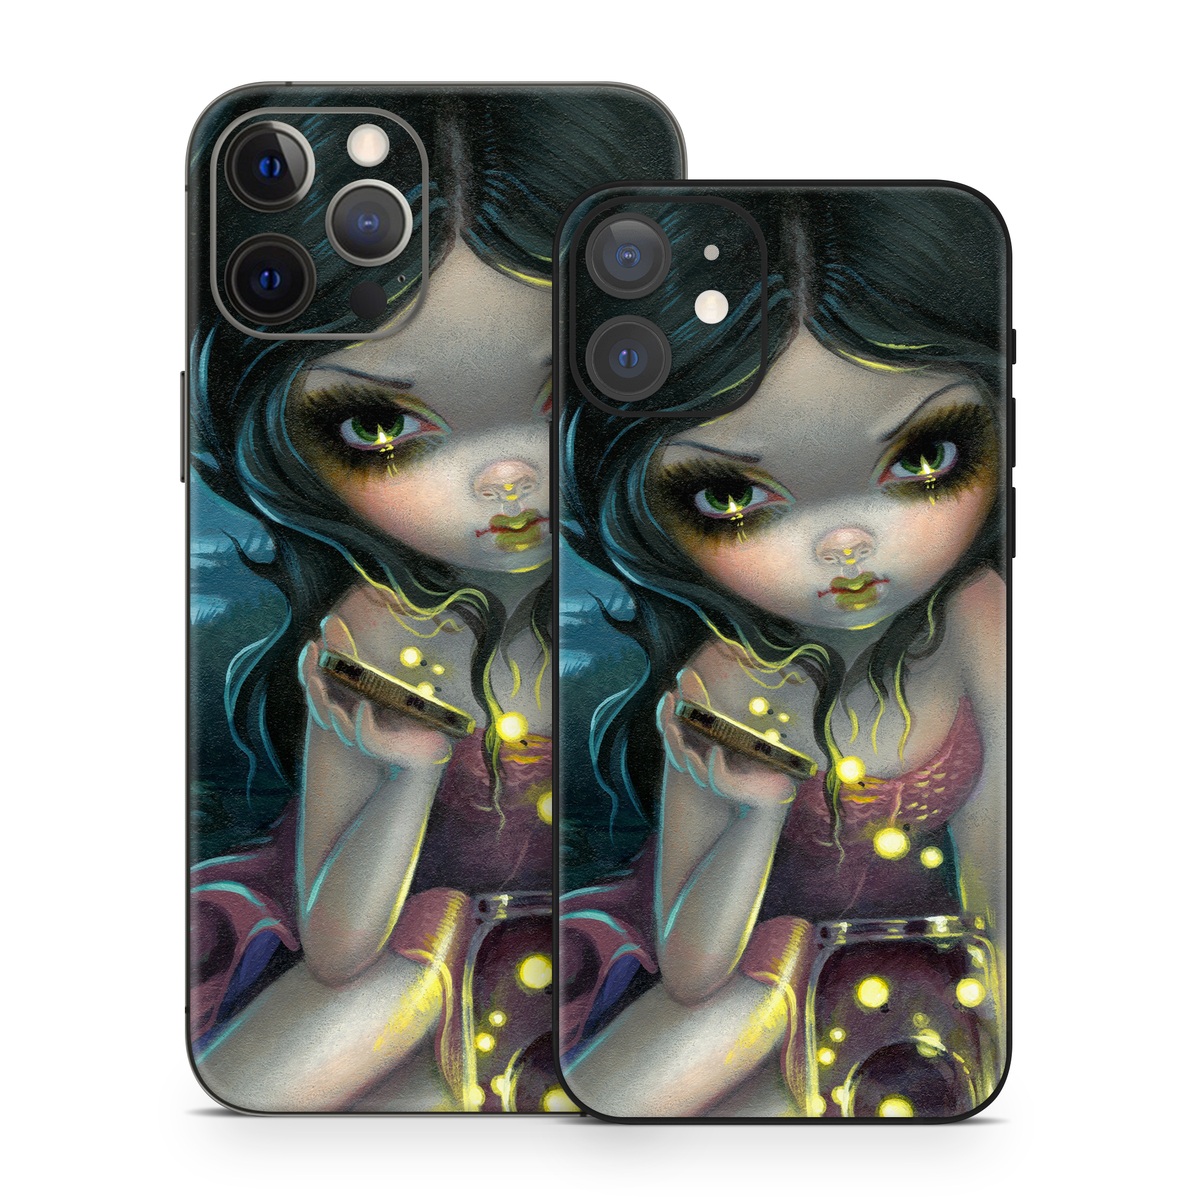 iPhone 12 Skin design of Cg artwork, Illustration, Fictional character, Art, Iris, Black hair, Fawn, Mythology, Fiction, with blue, green, pink, yellow, black, white colors